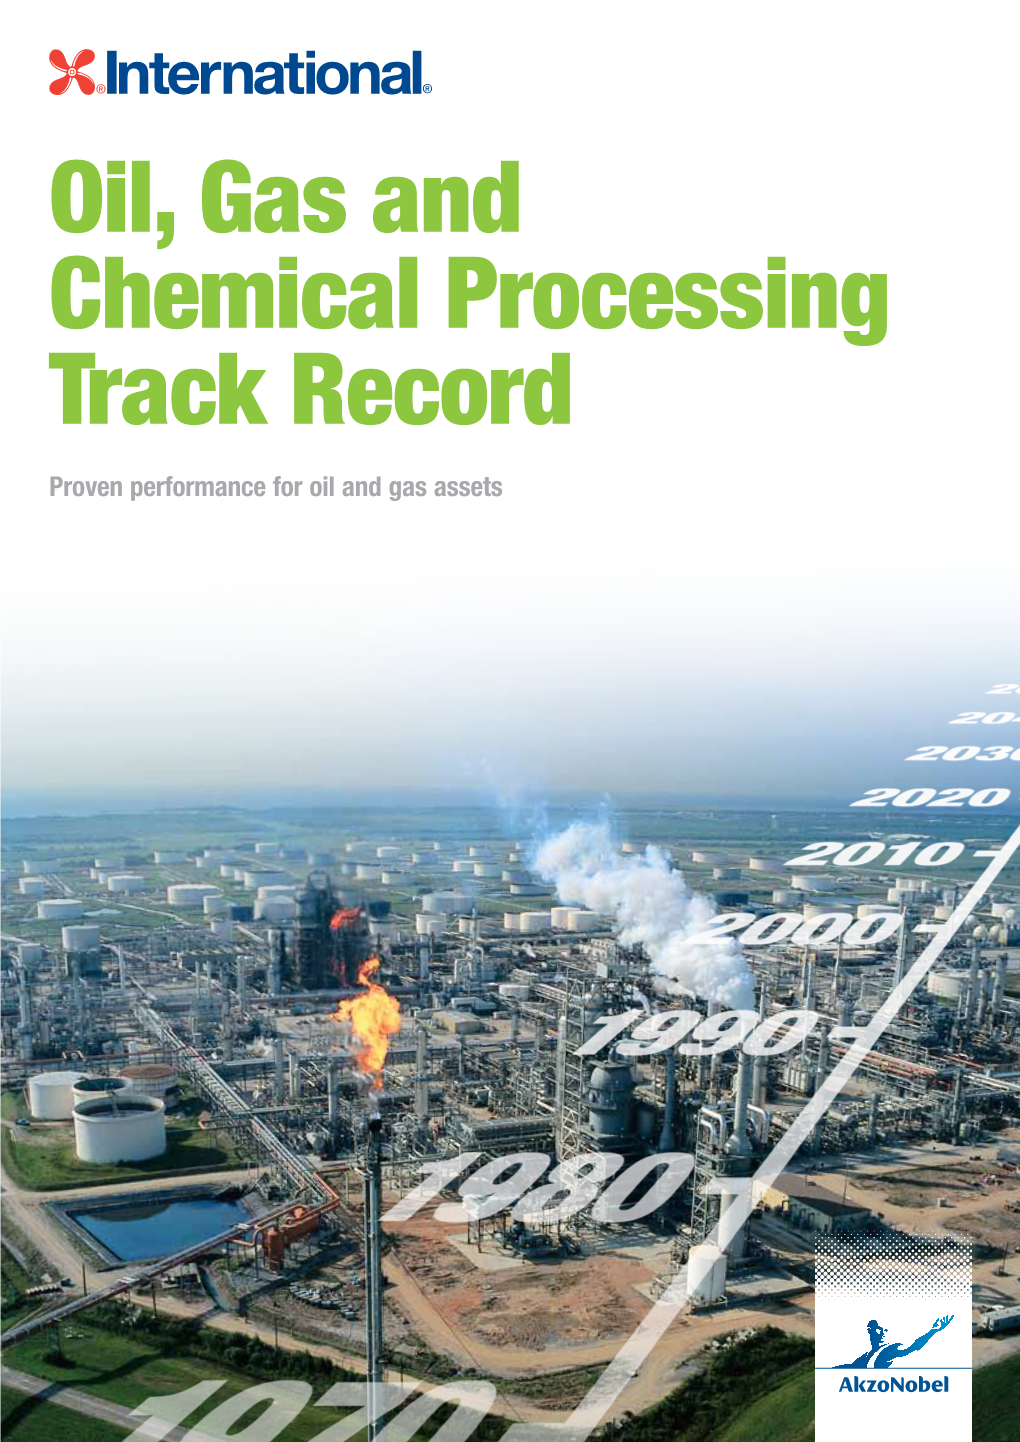 Oil, Gas and Chemical Processing Track Record